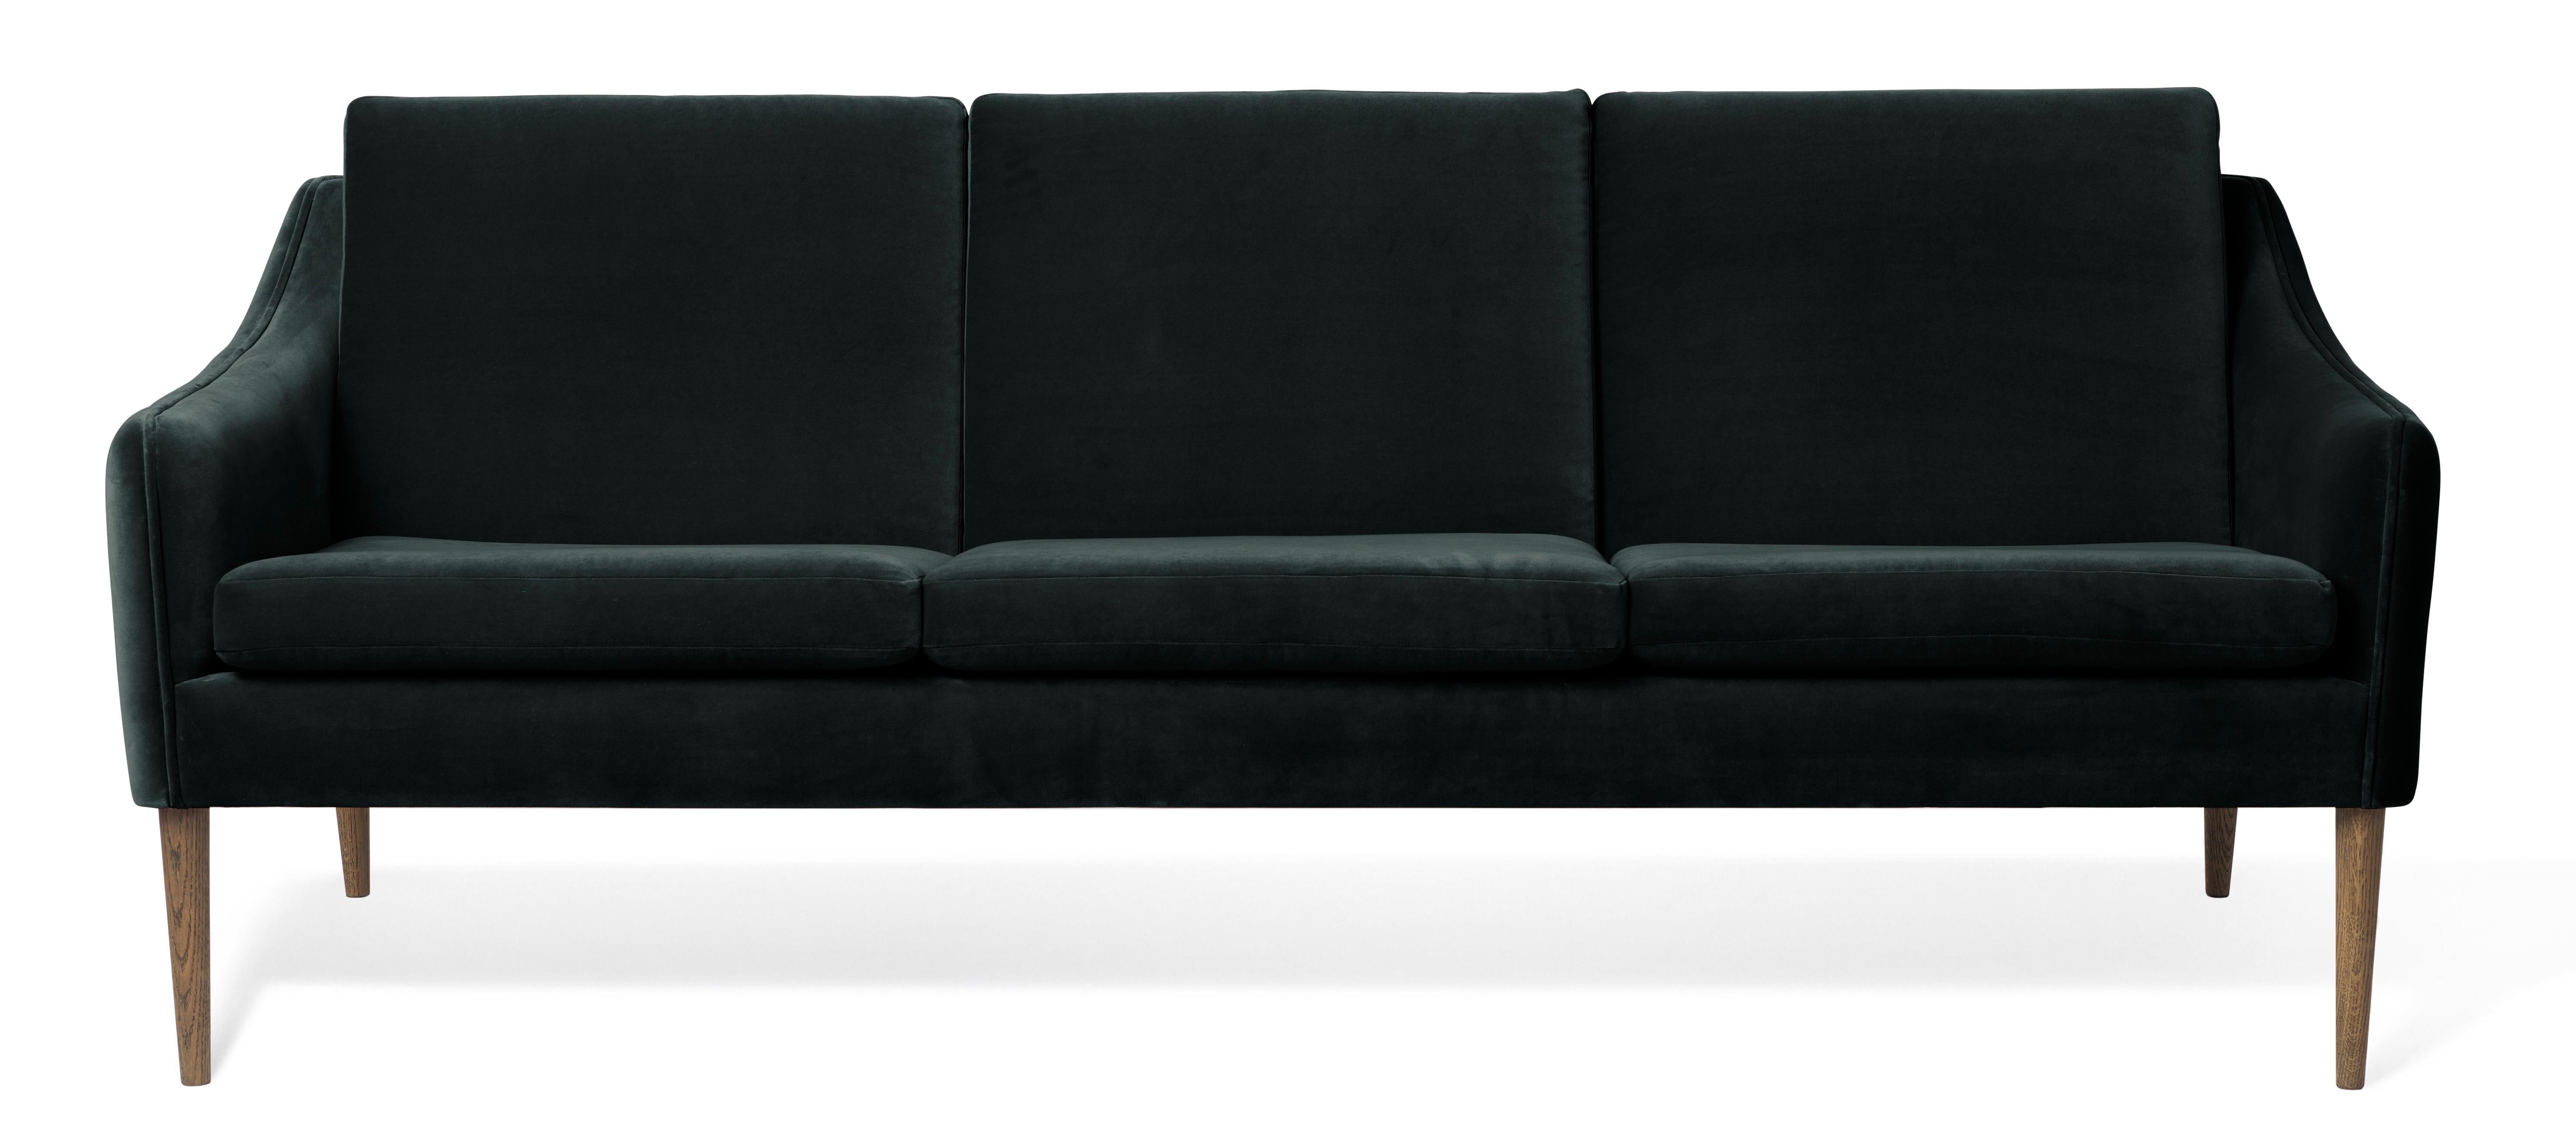 For Sale: Green (Ritz 0705) Mr. Olsen 3-Seat Sofa with Smoked Oak Legs, by Hans Olsen from Warm Nordic 2